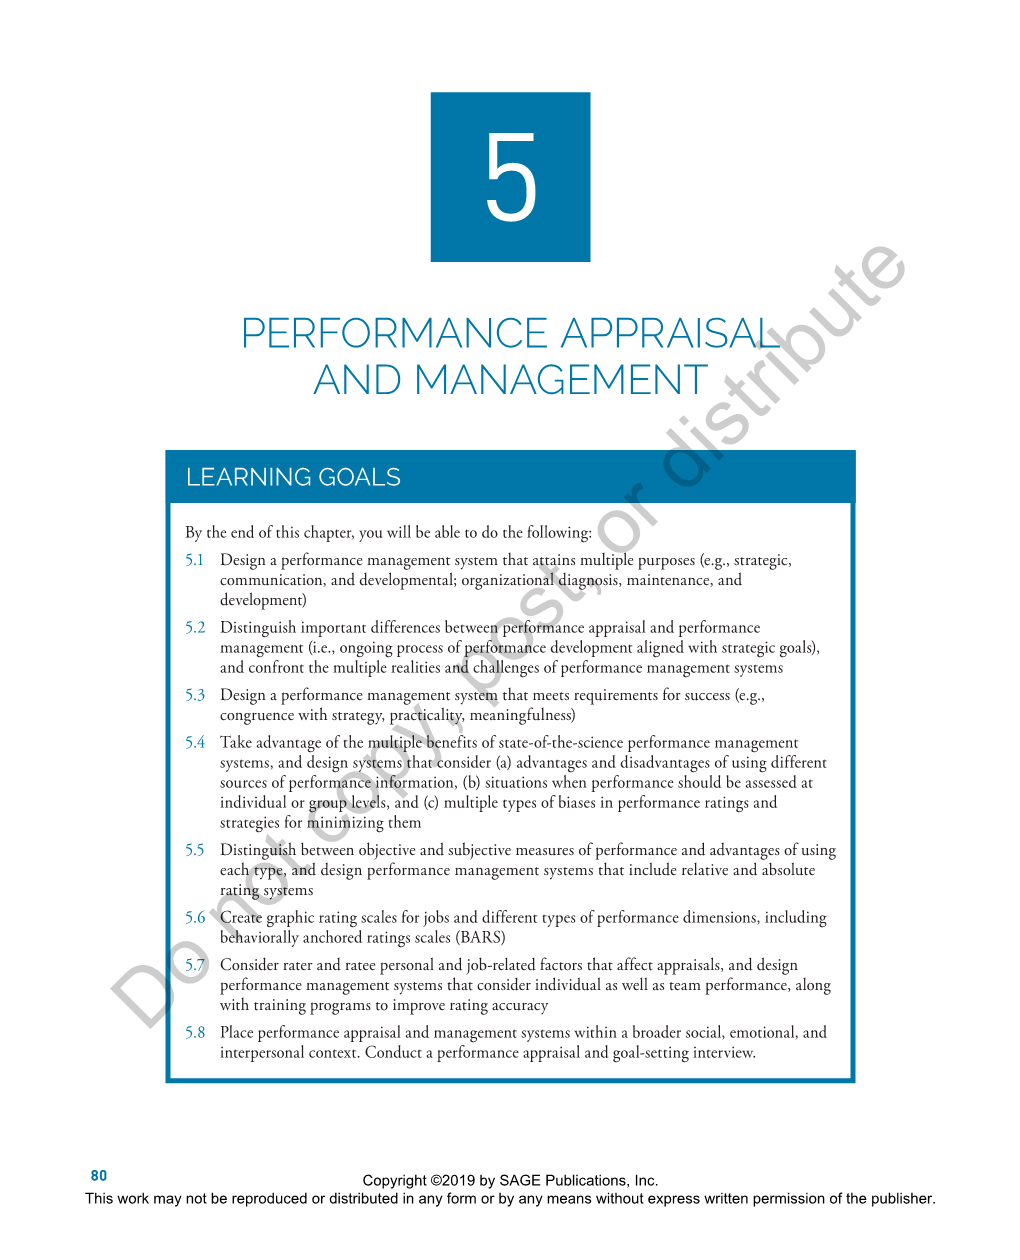 Chapter 5. Performance Appraisal and Management